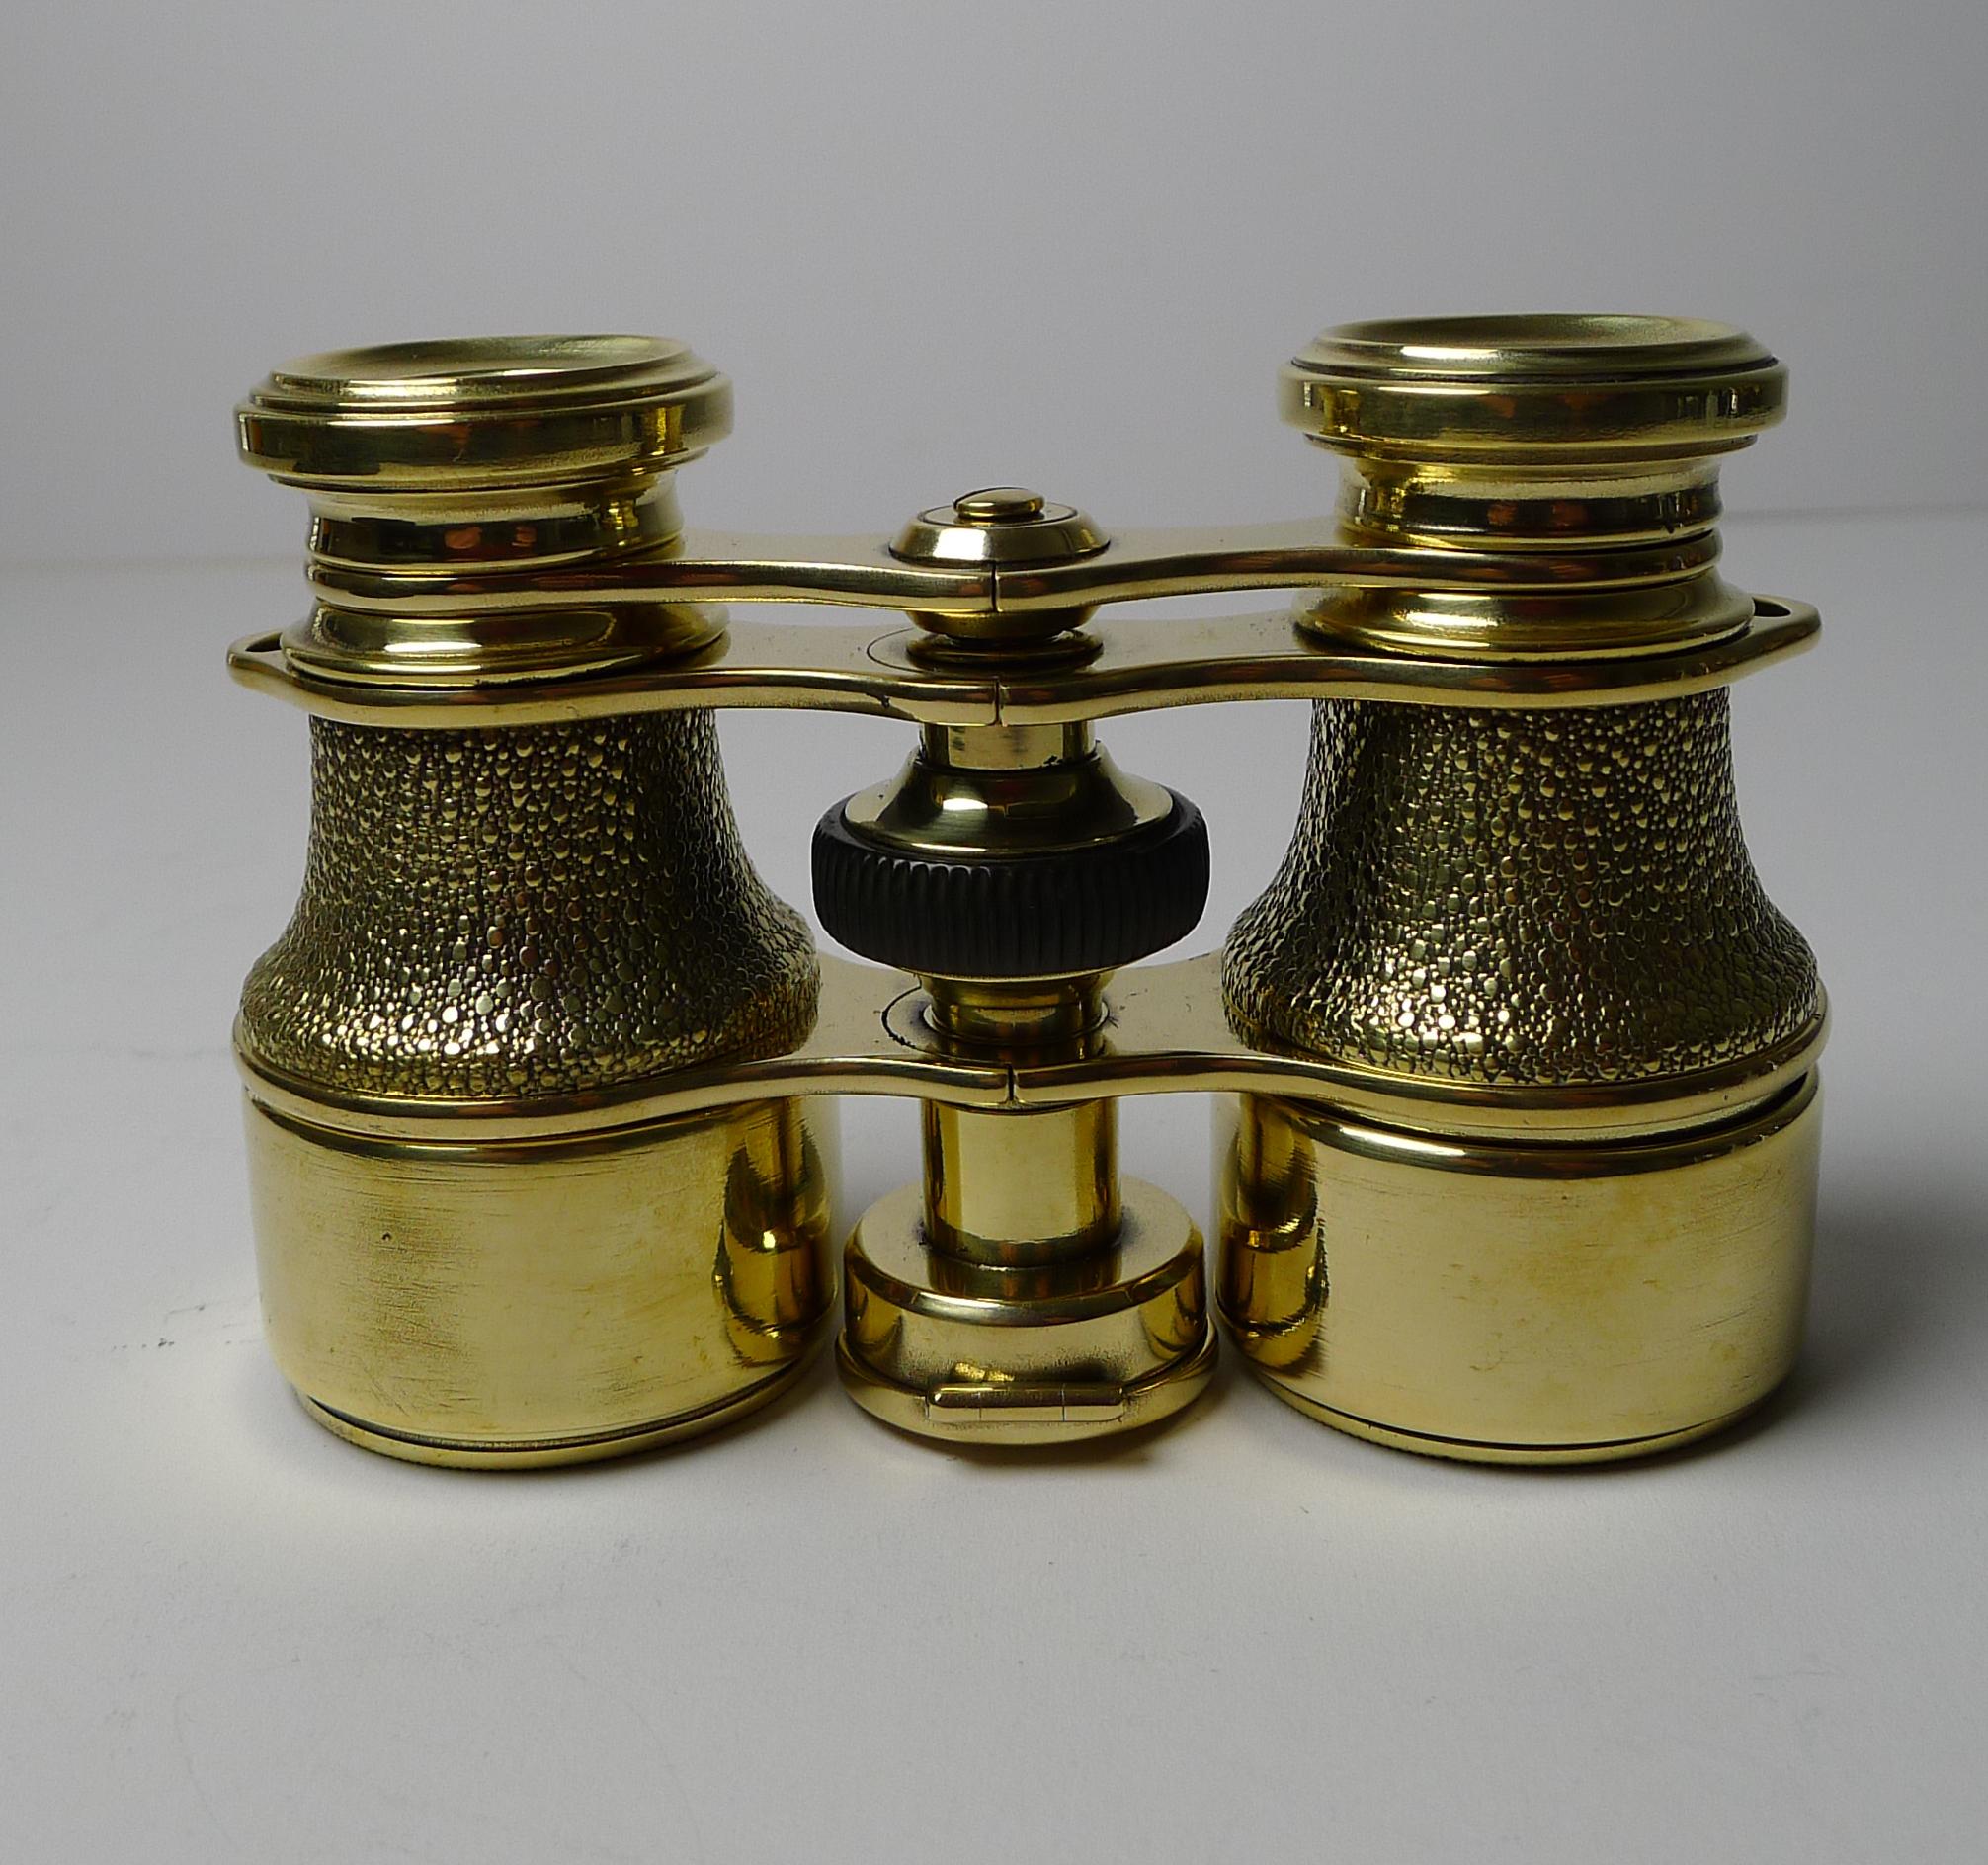 Brass Antique English Field Glasses / Binoculars by Lawrence and Mayo, with Compass